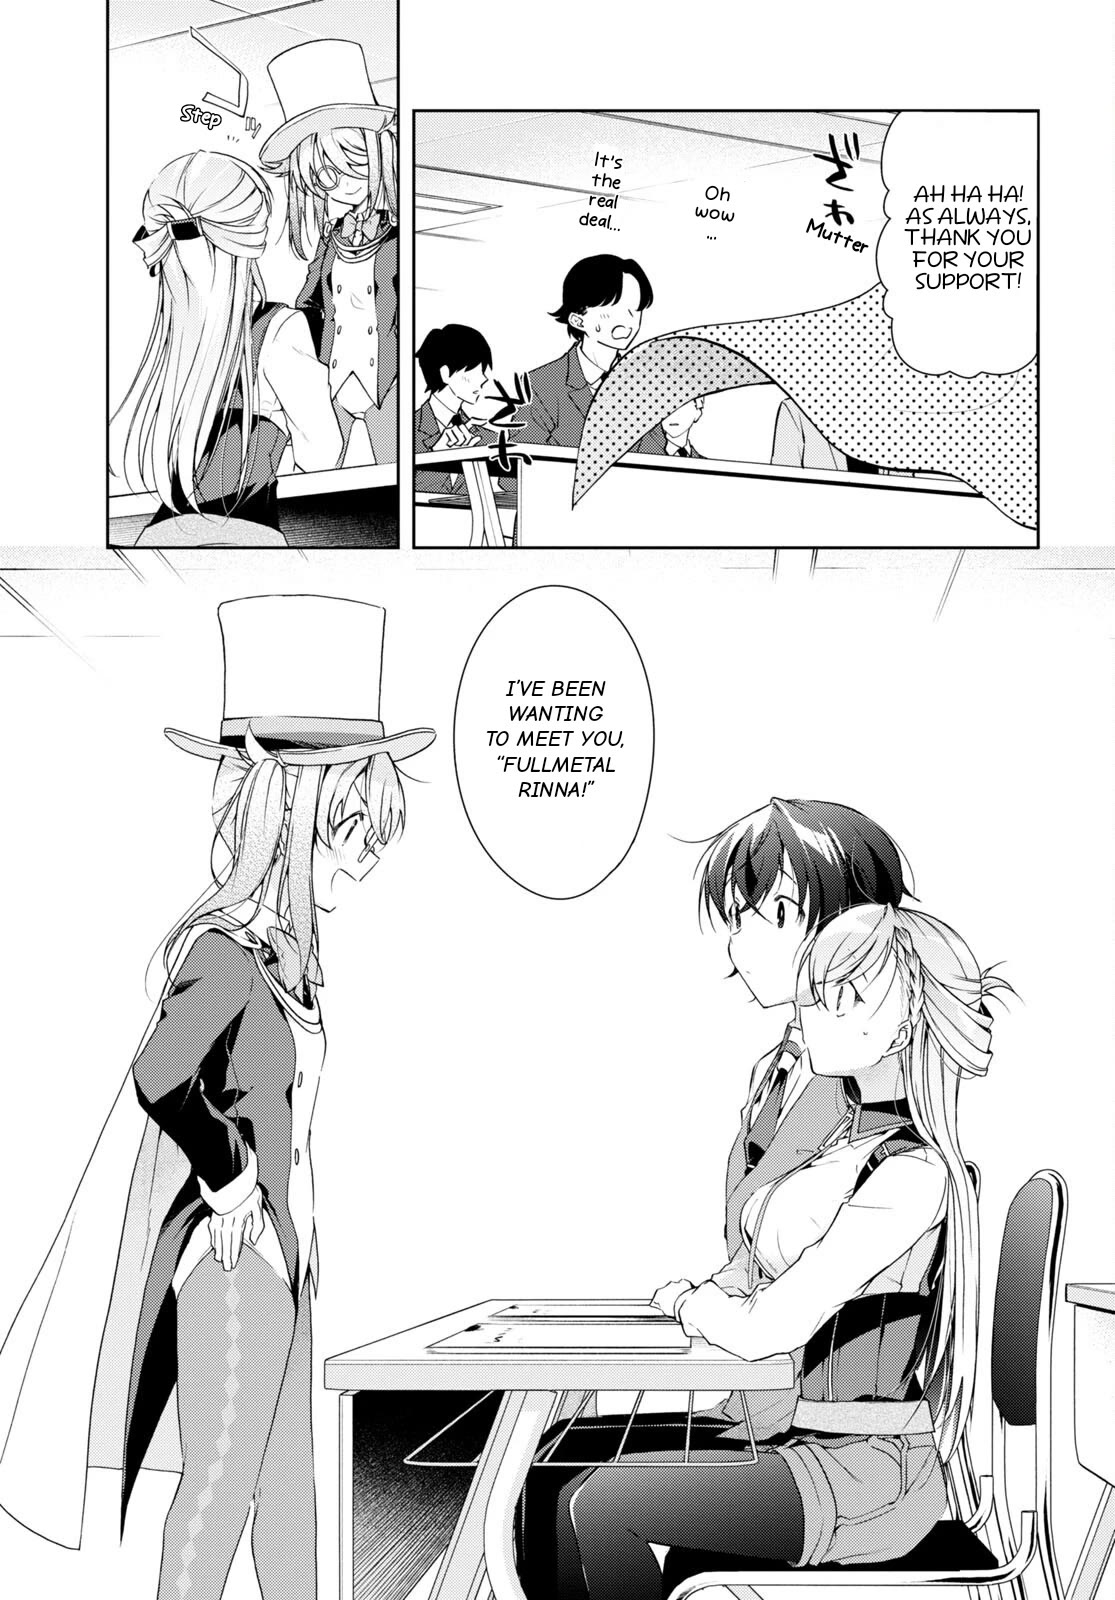 Isshiki-san Wants to Know About Love. - chapter 31 - #6